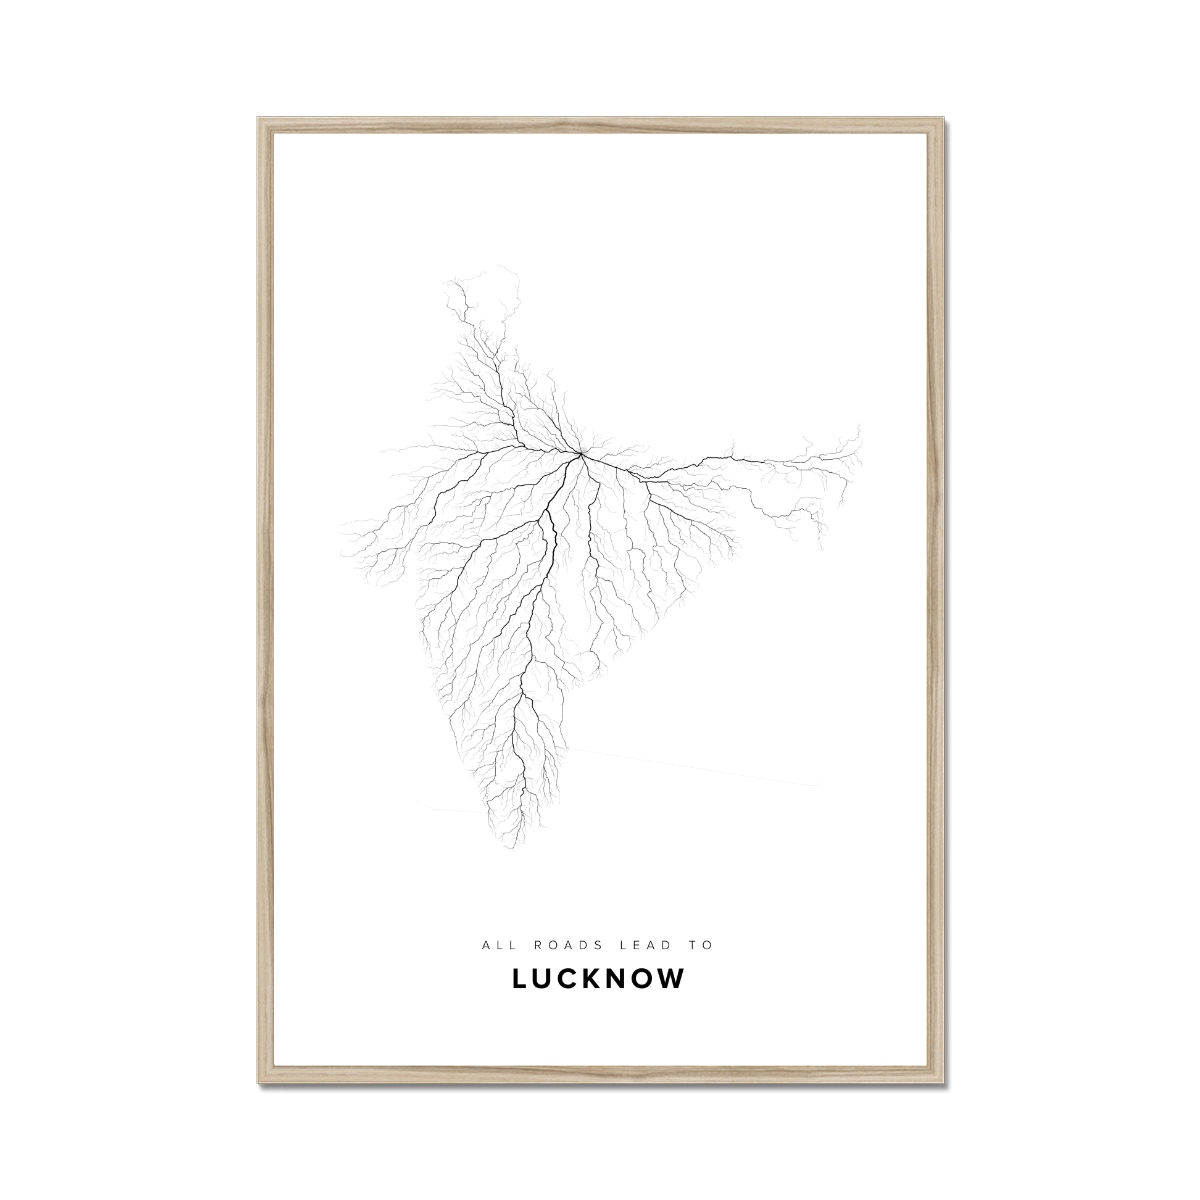 All roads lead to Lucknow (India) Fine Art Map Print